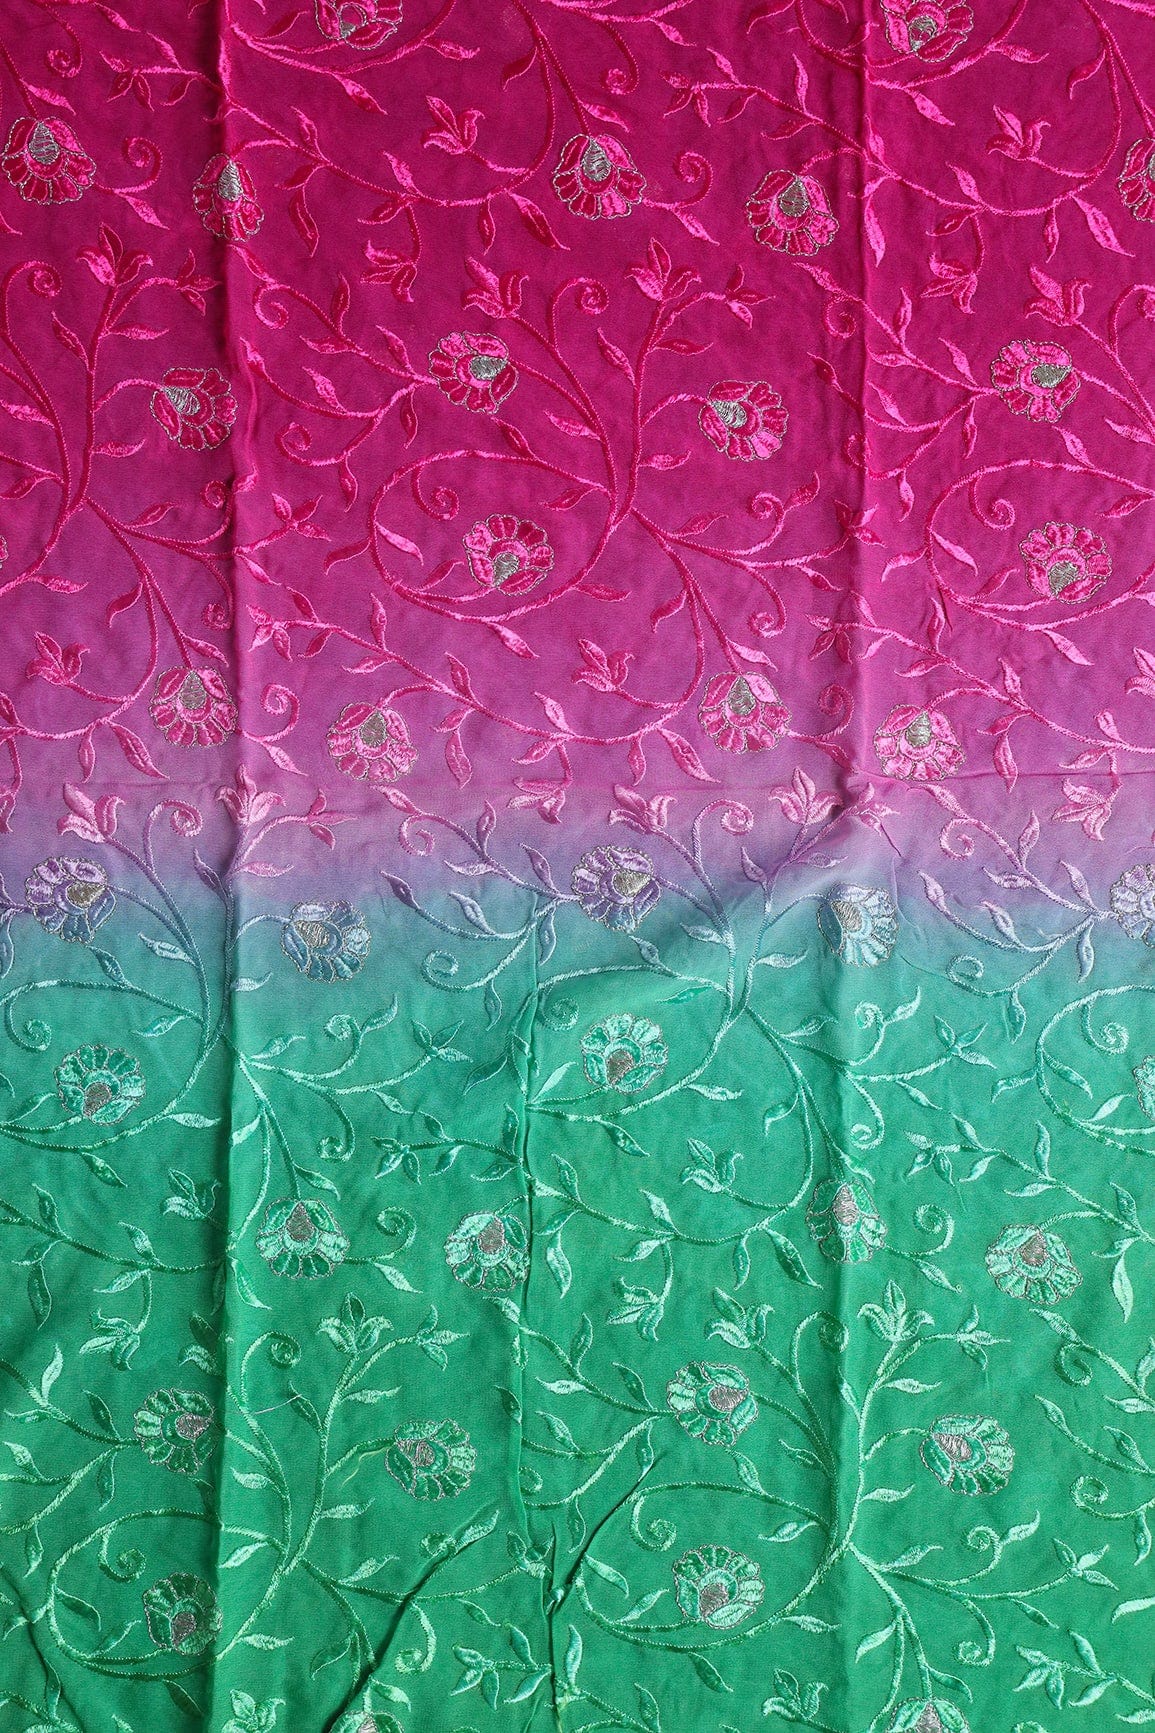 doeraa Embroidery Fabrics 2 Meter Cut Piece Of Multi Thread With Zari Floral Embroidery On Multi Color Viscose Georgette Fabric